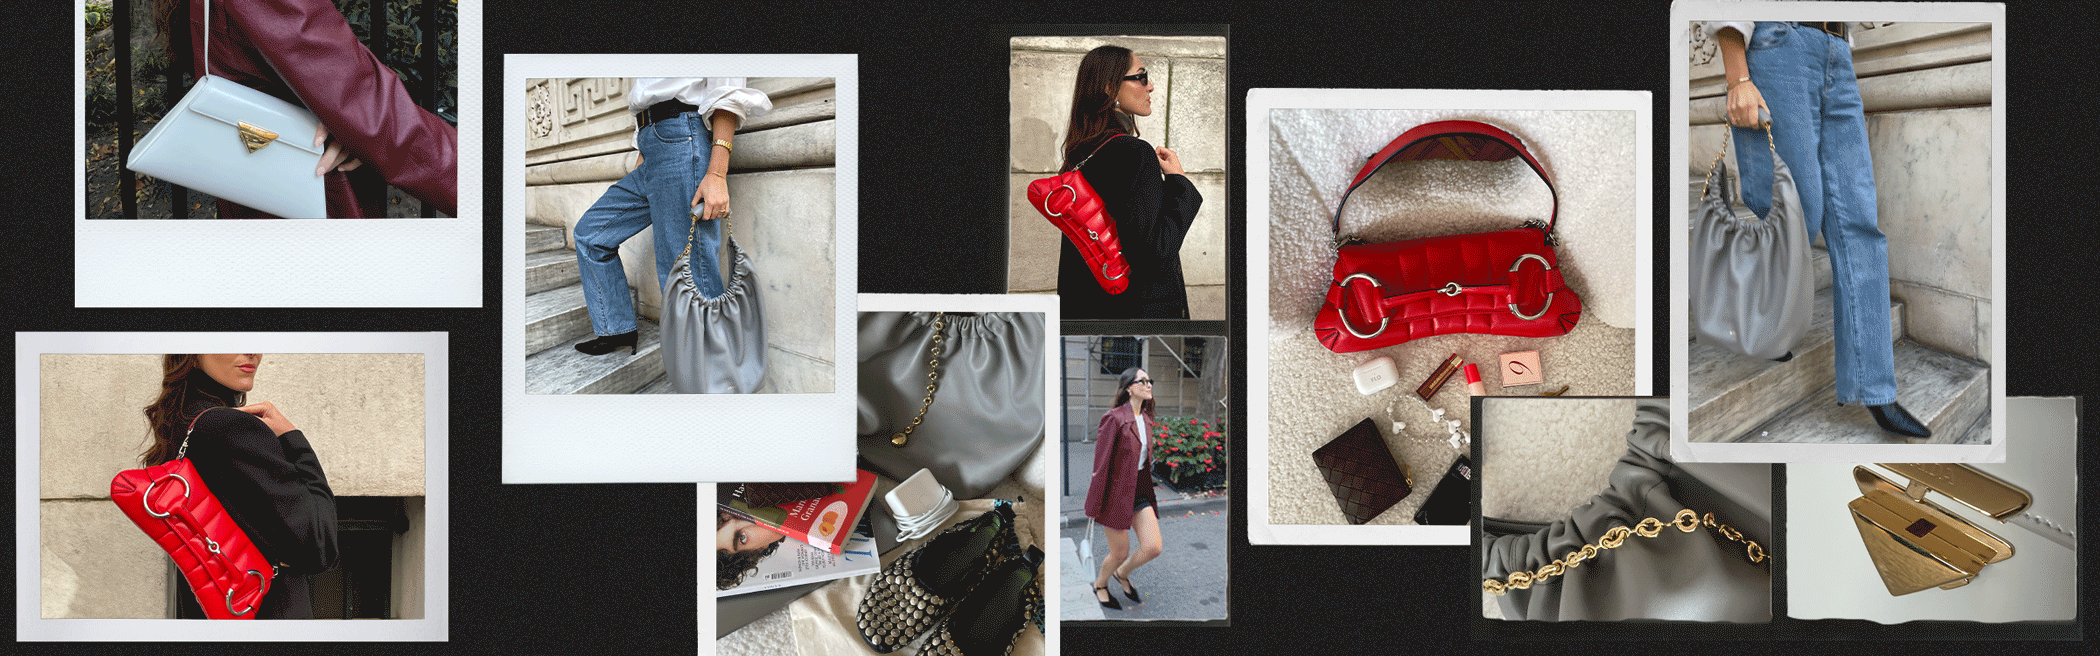 I Spent a Week With Fall's Most Popular Designer Bags—Here Are My Candid Reviews